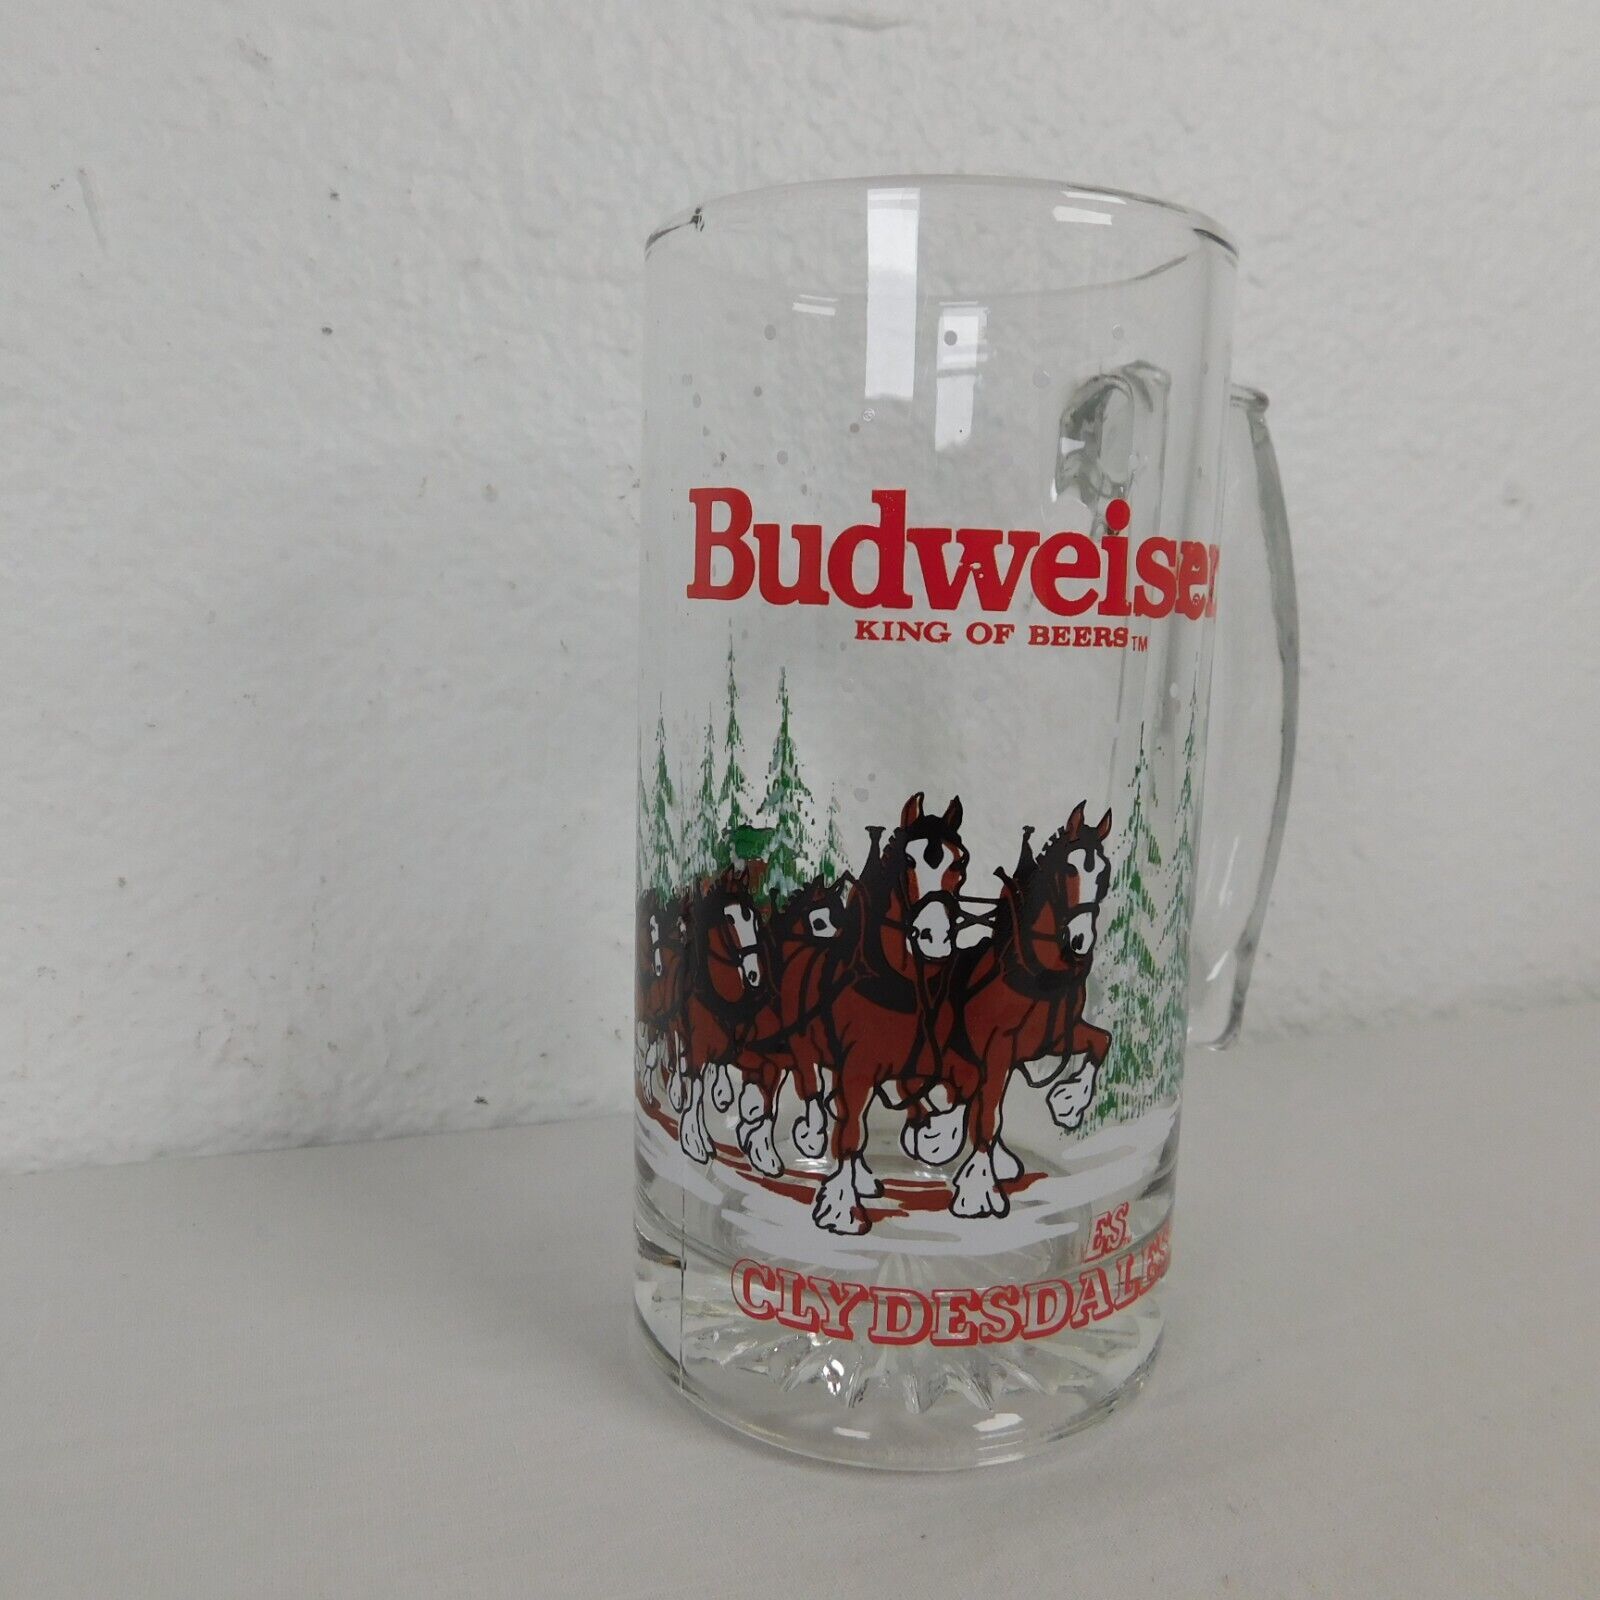 Primary image for Budweiser 1988 Clydesdales Heavy Glass Beer Mug Wagon Christmas Trees Snow 